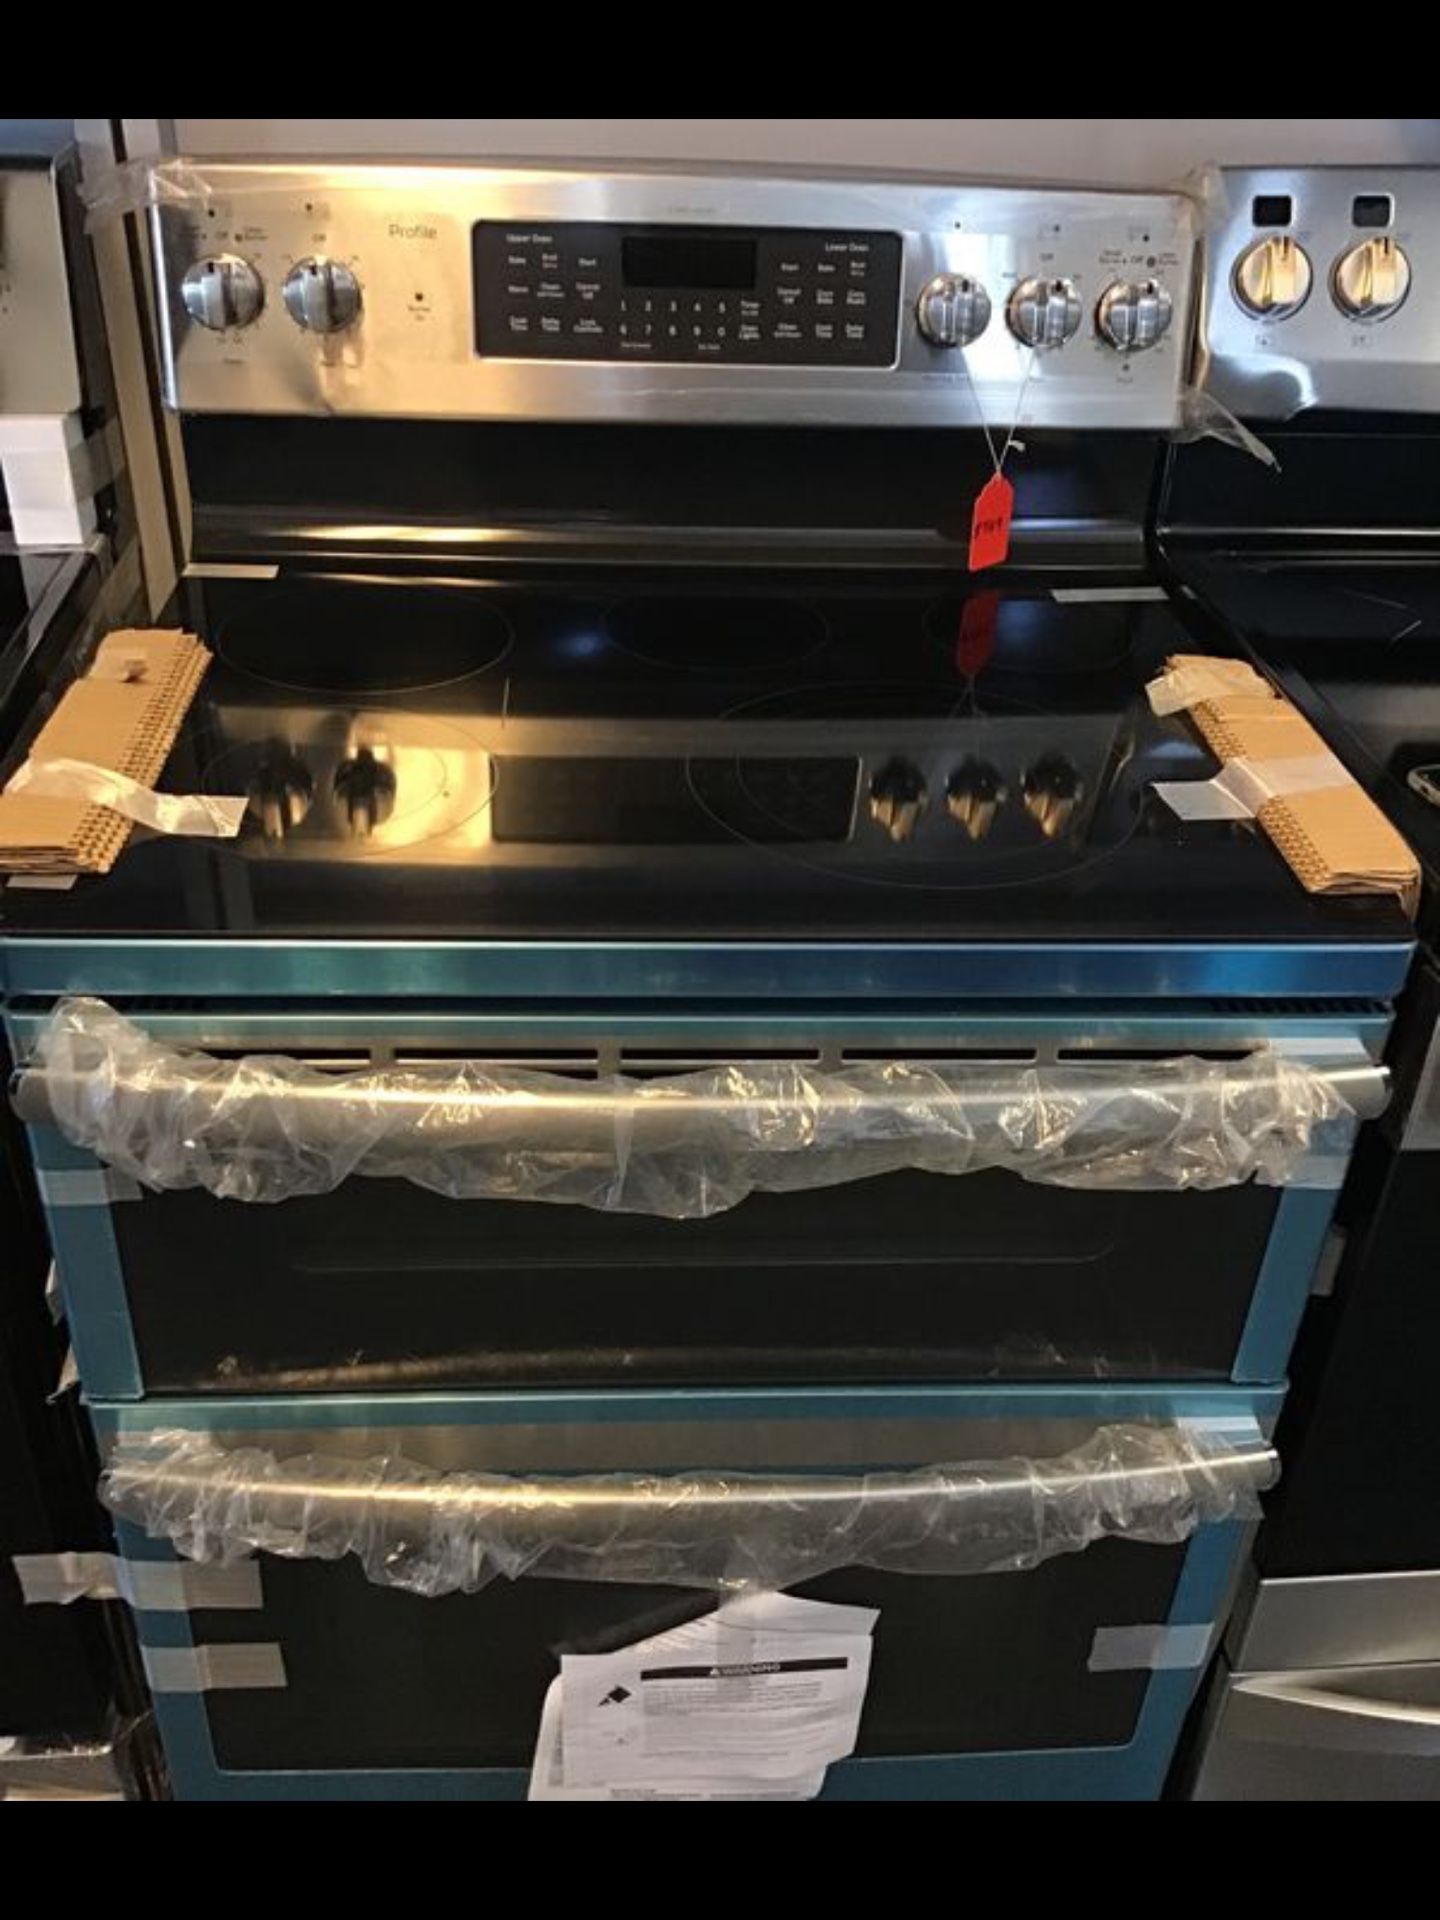 New scratch and dent Ge Profile 5 burner glass top stove double oven. 1 year warranty